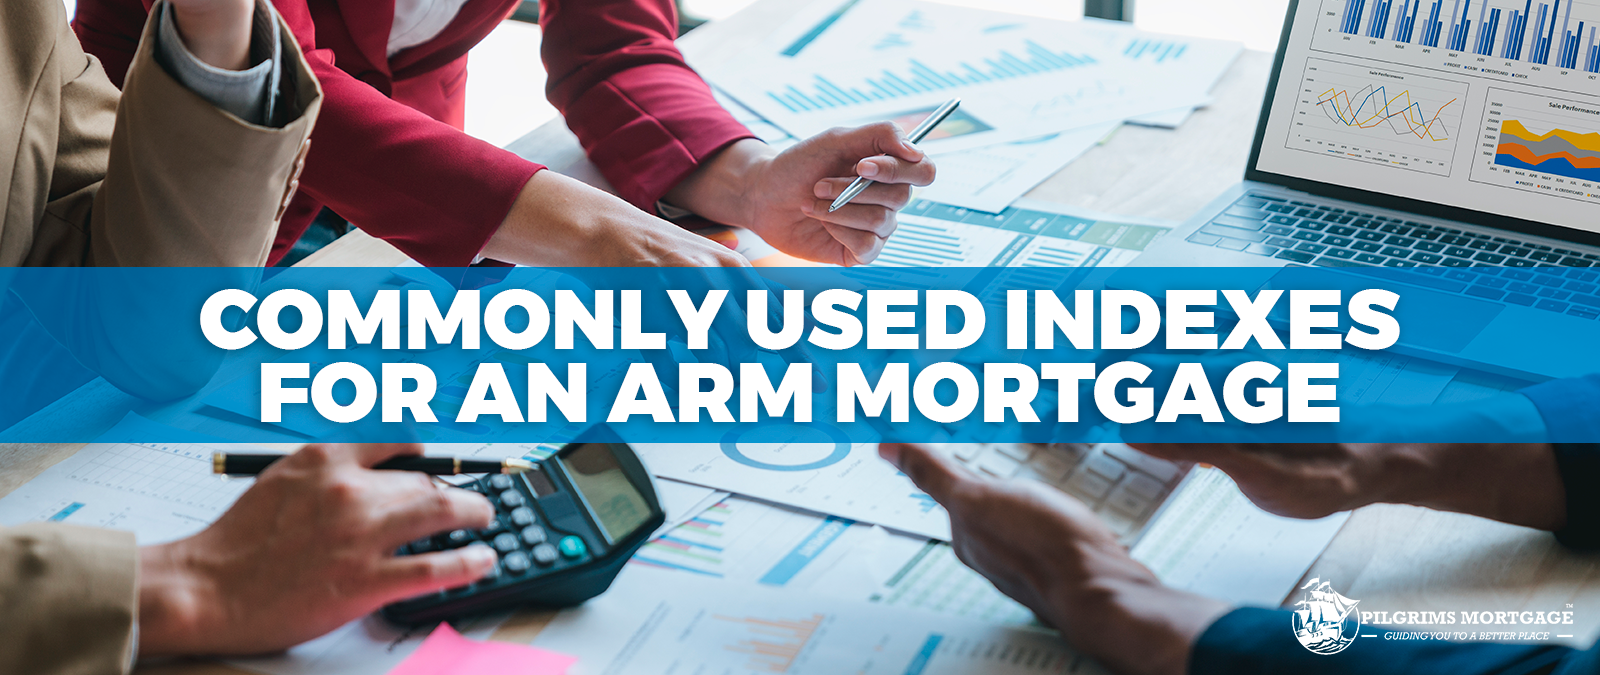 COMMONLY USED INDEXES FOR AN ARM MORTGAGE